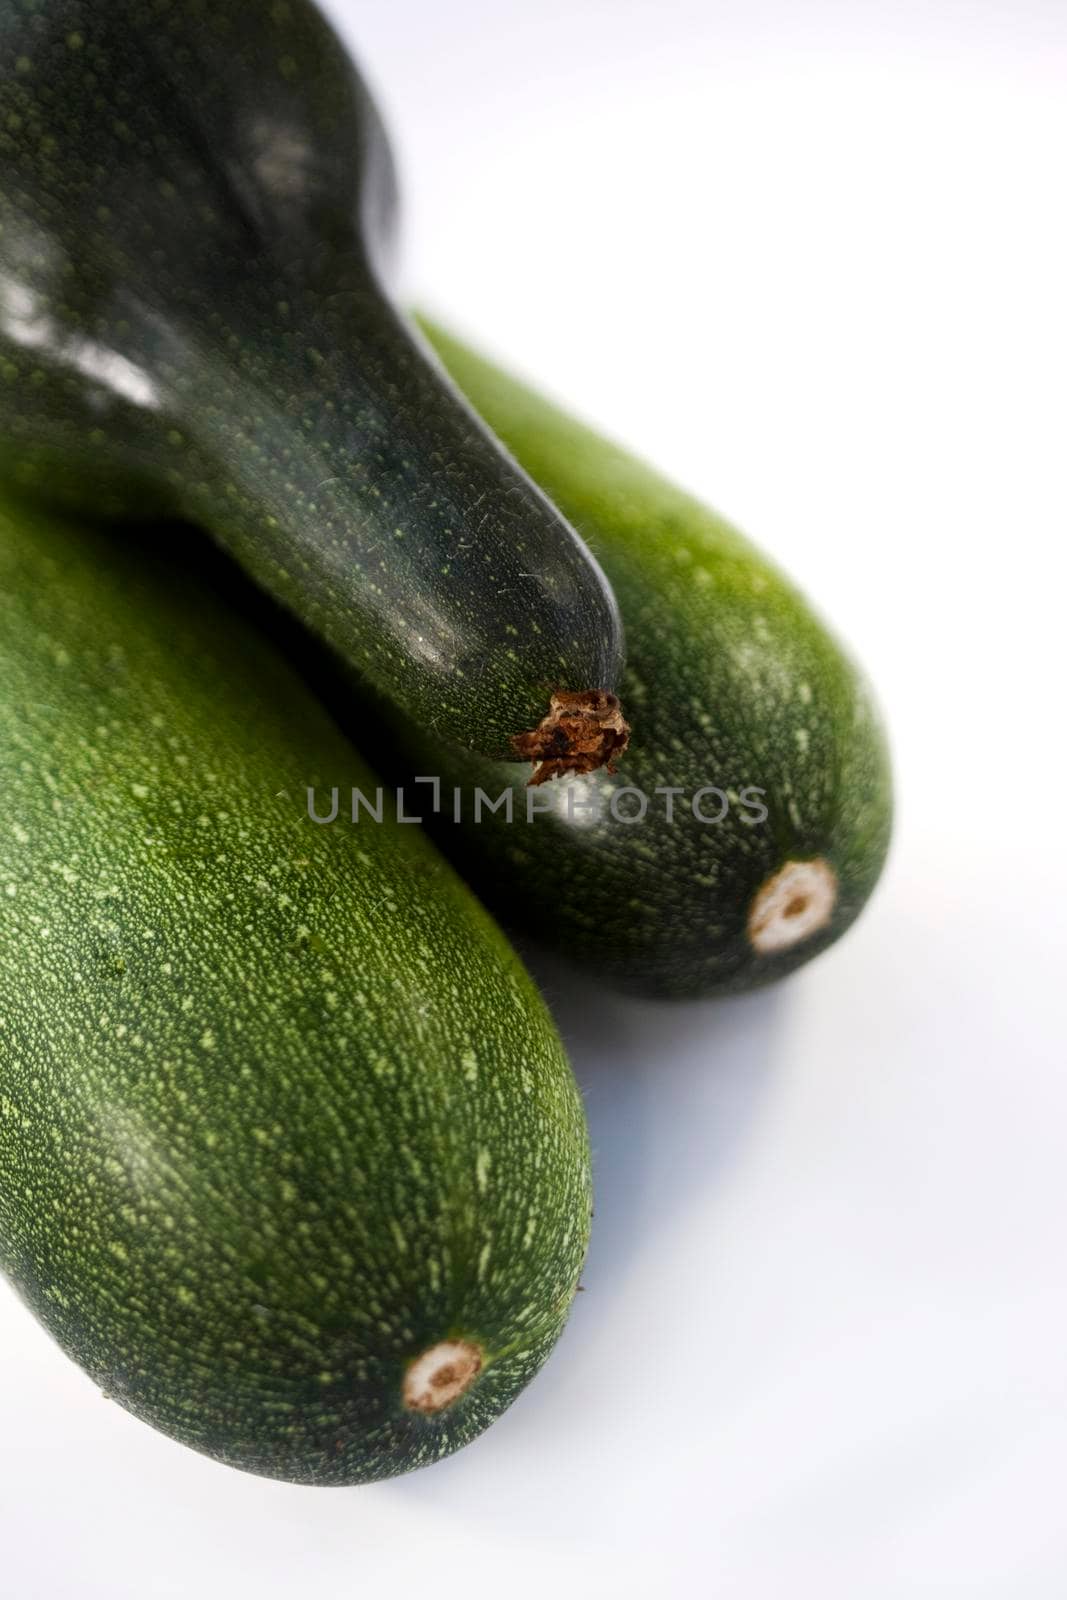 Close up of green zucchini on a table